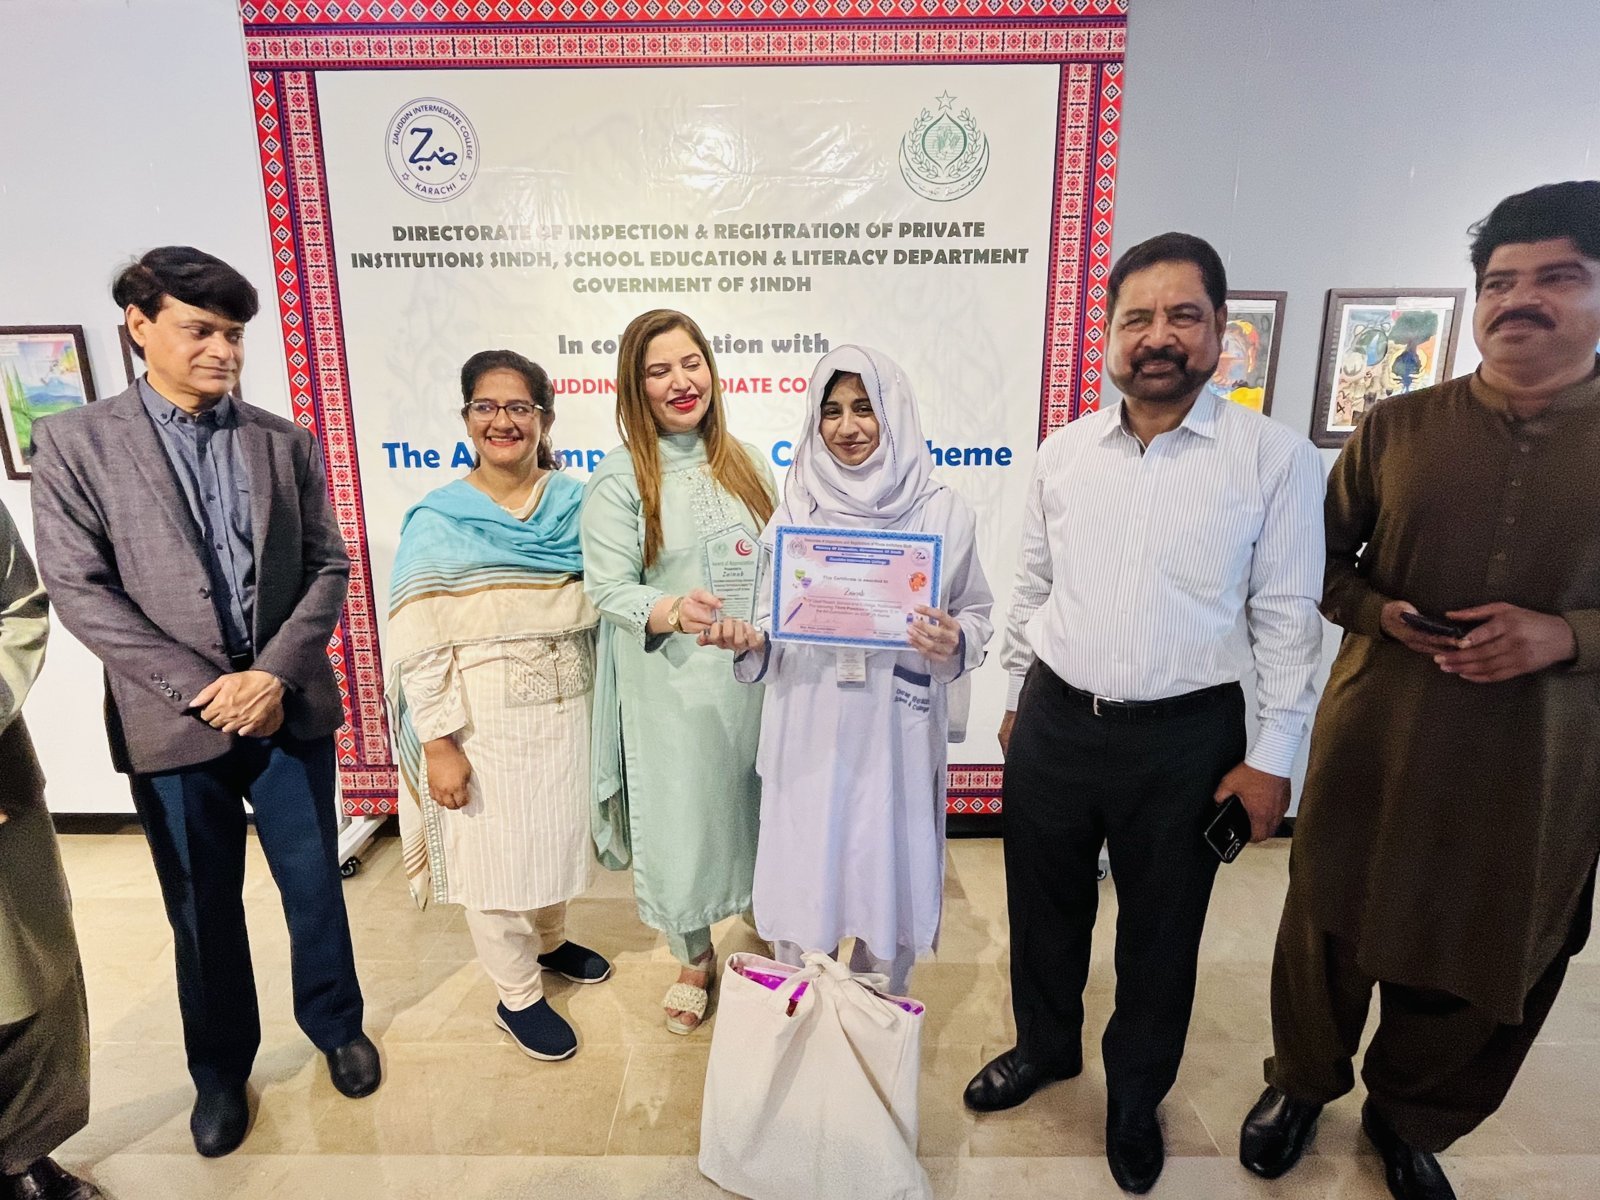 Deaf Reach’s Zainab Usman wins 3rd position in an Art Competition organized by UAE Consulate and Sindh Education Department